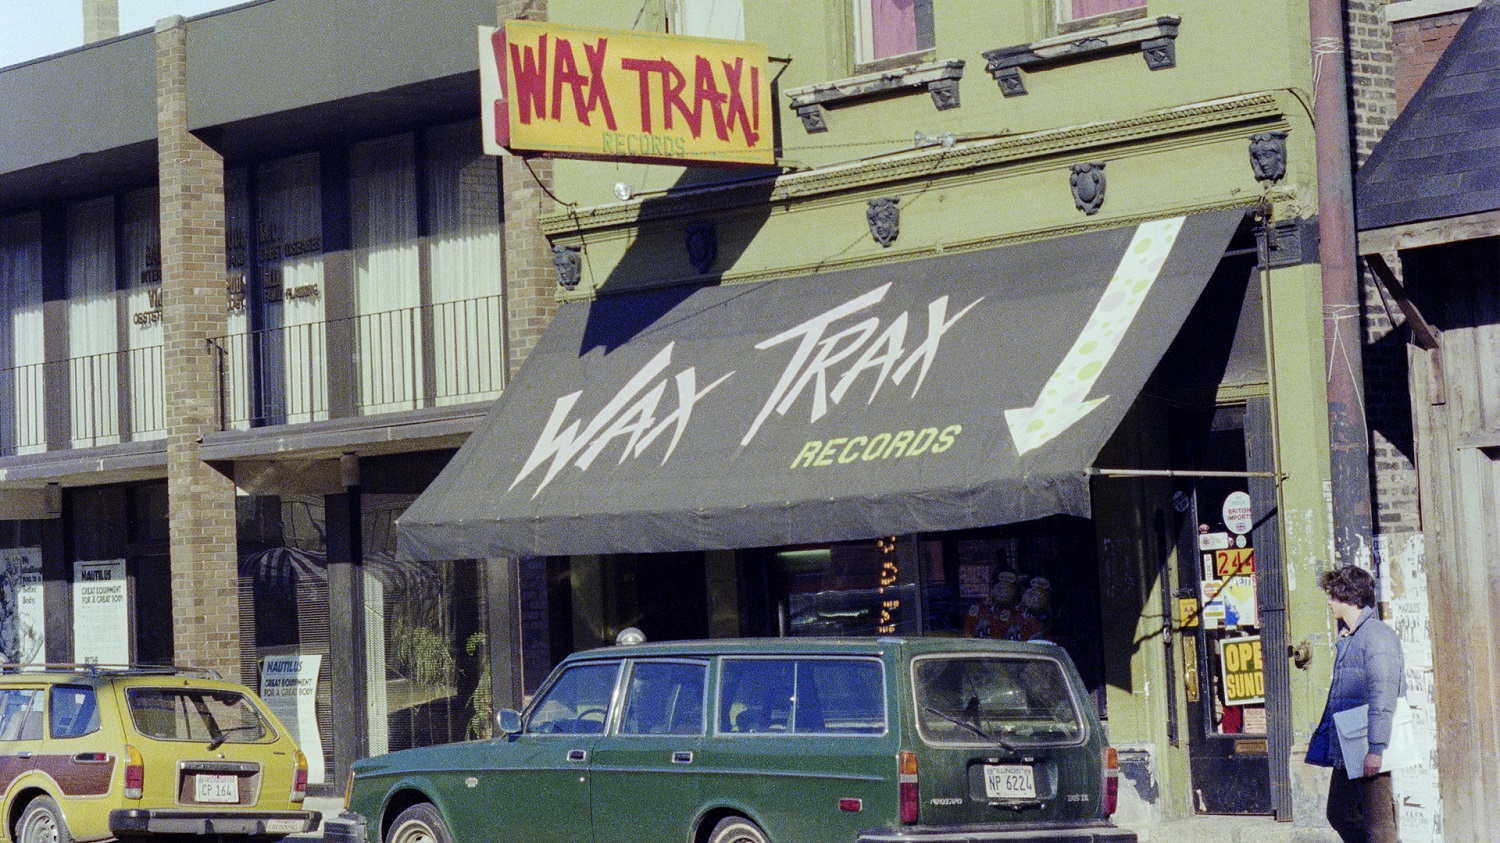 Industrial Accident: The Story of Wax Trax! Records